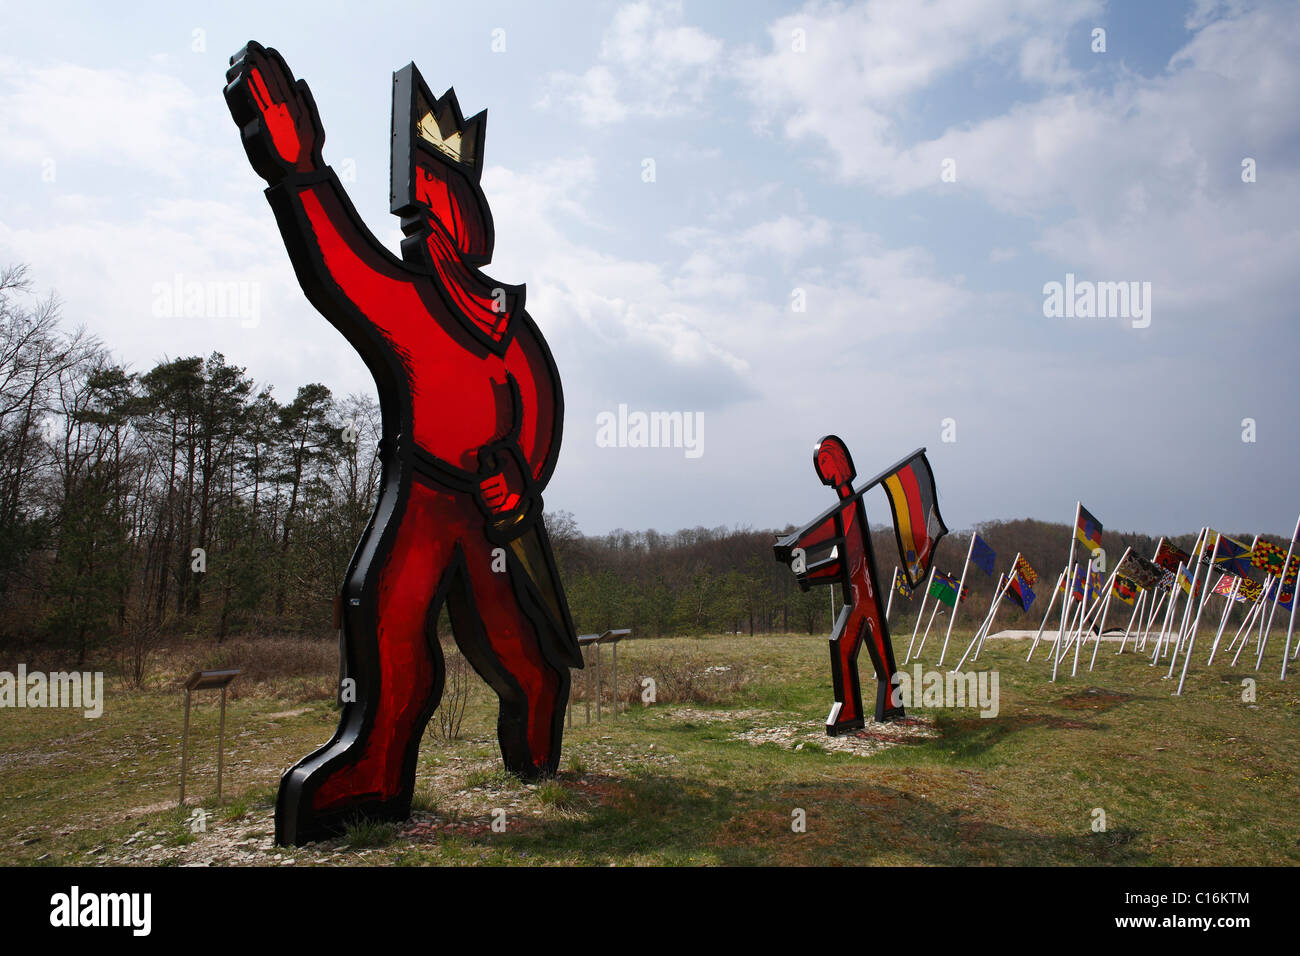 'Barbarossa' work of art by Herbert Fell, 'Sculpture park' national monument to German unity on the Thuringian/Bavarian border Stock Photo